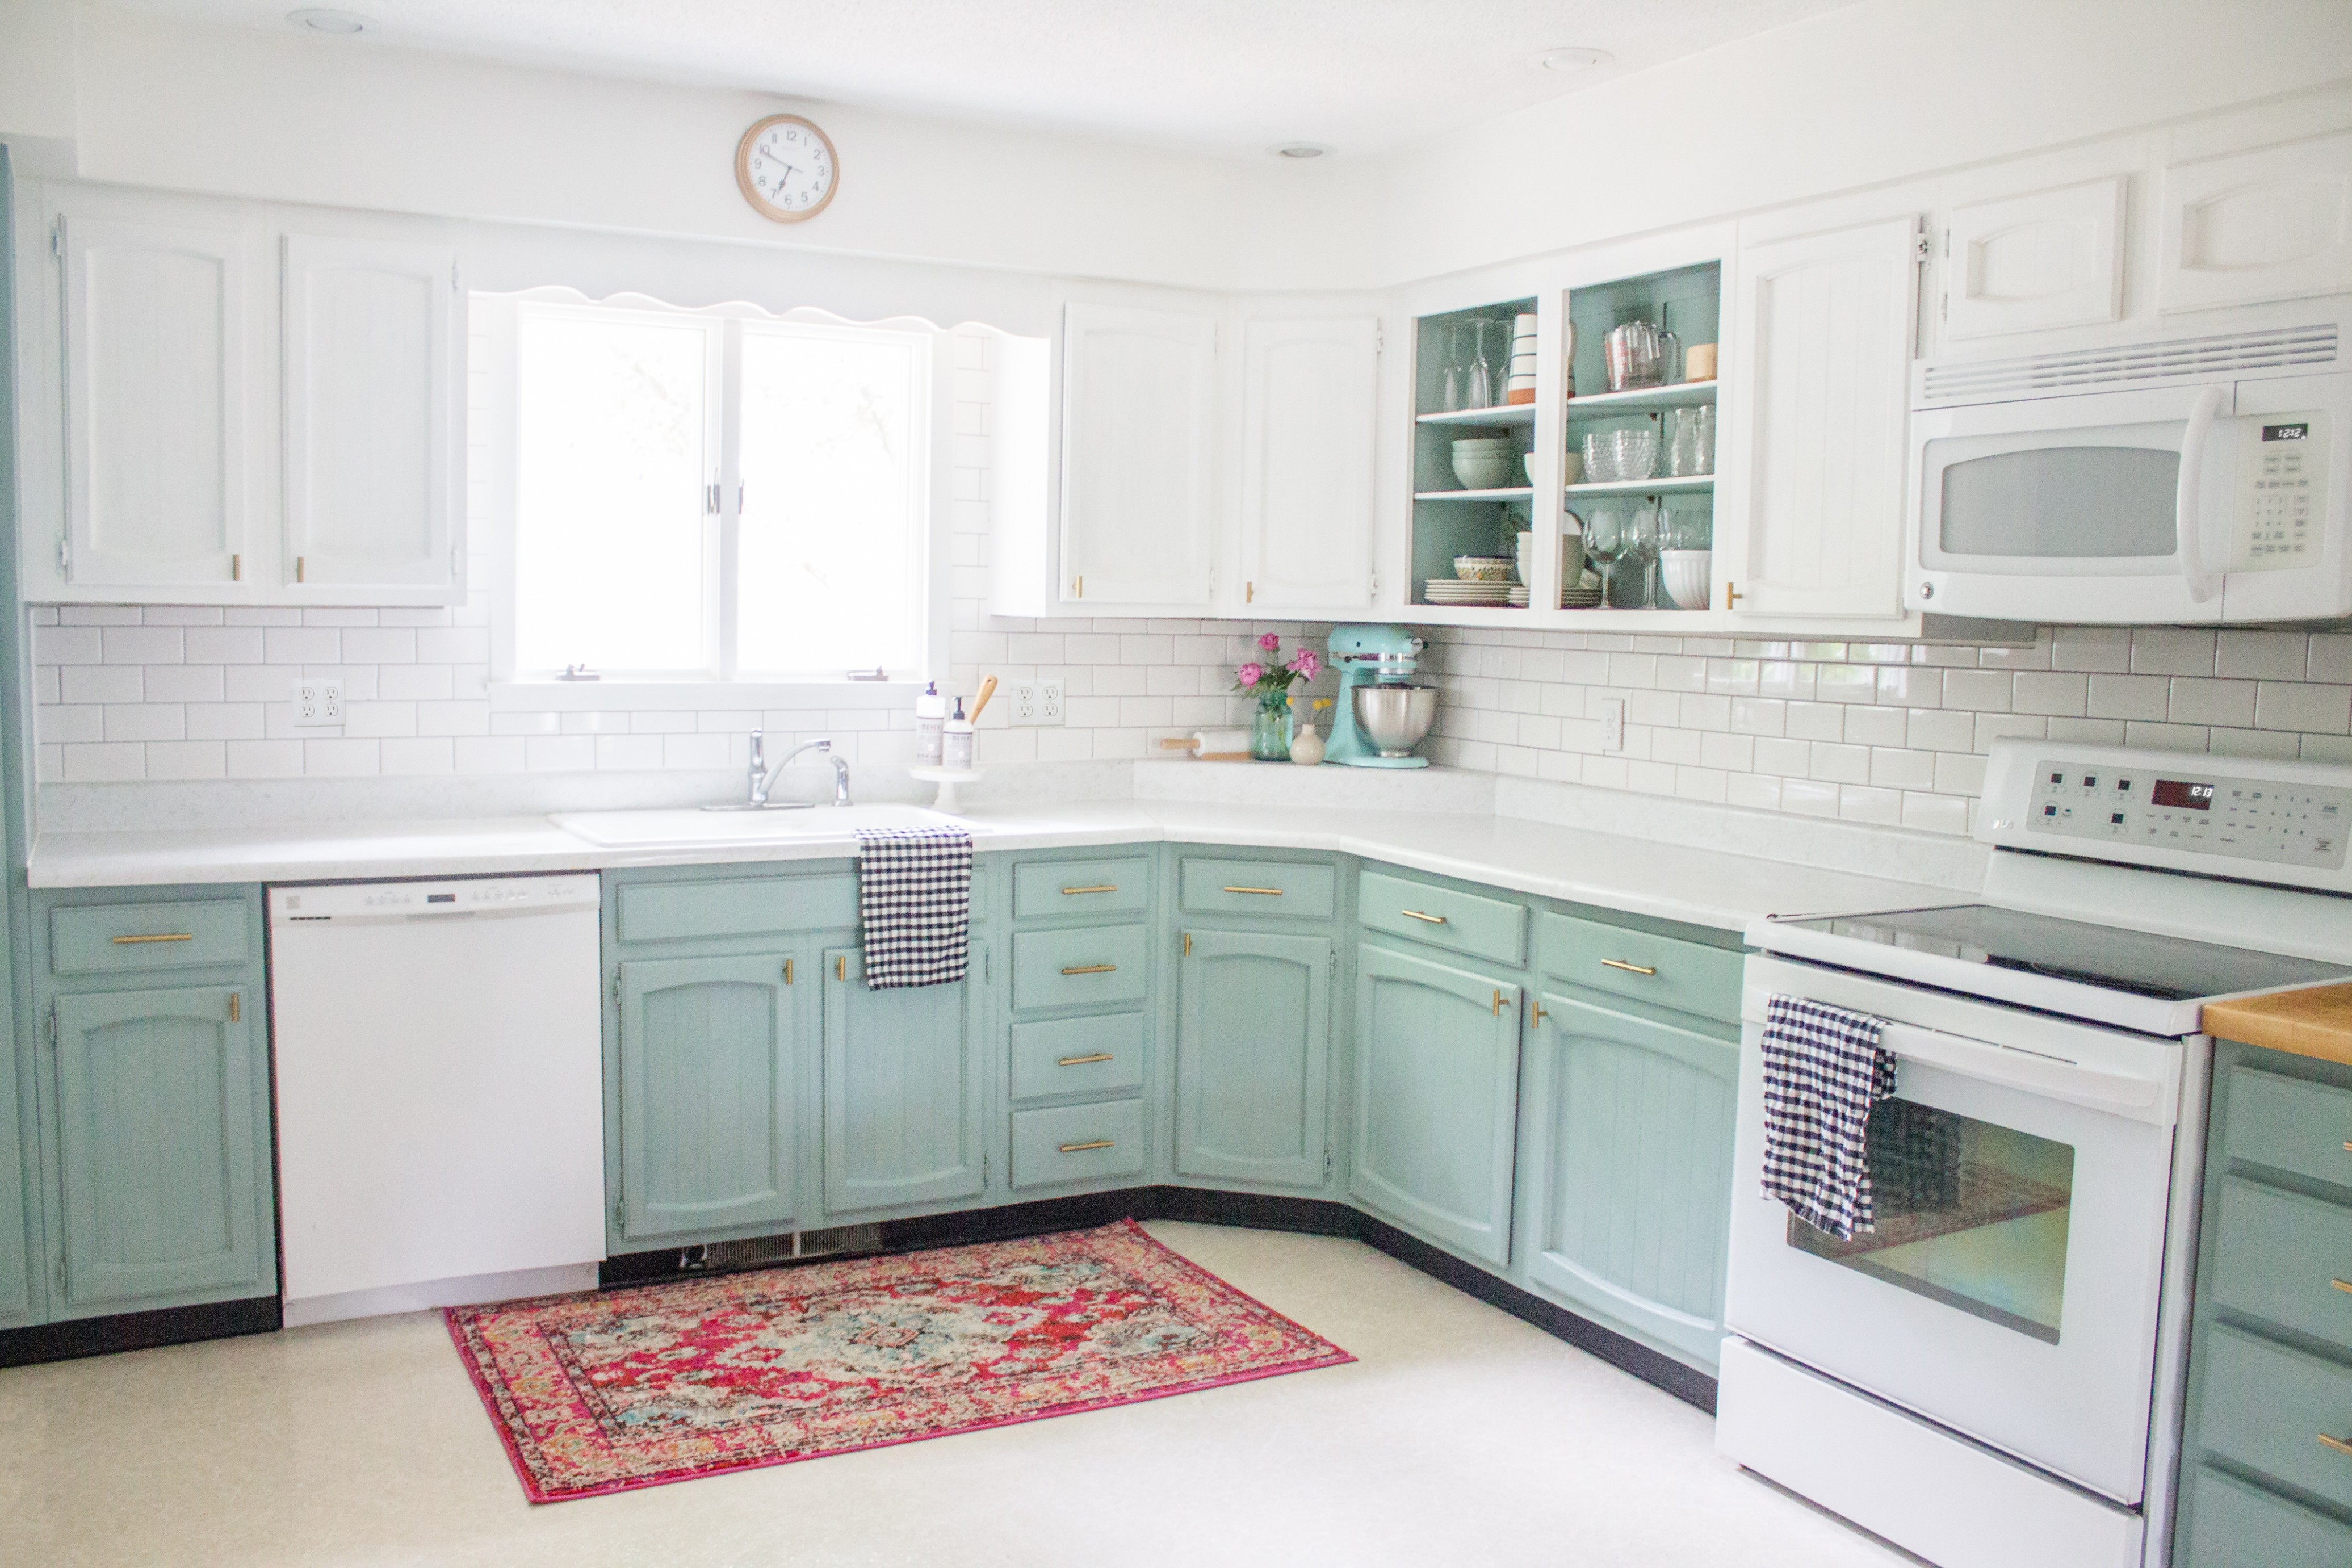 Chalk Painted Kitchen Cabinets Two Years Later | Holland Avenue Home Annie Sloan Chalk Paint 2018